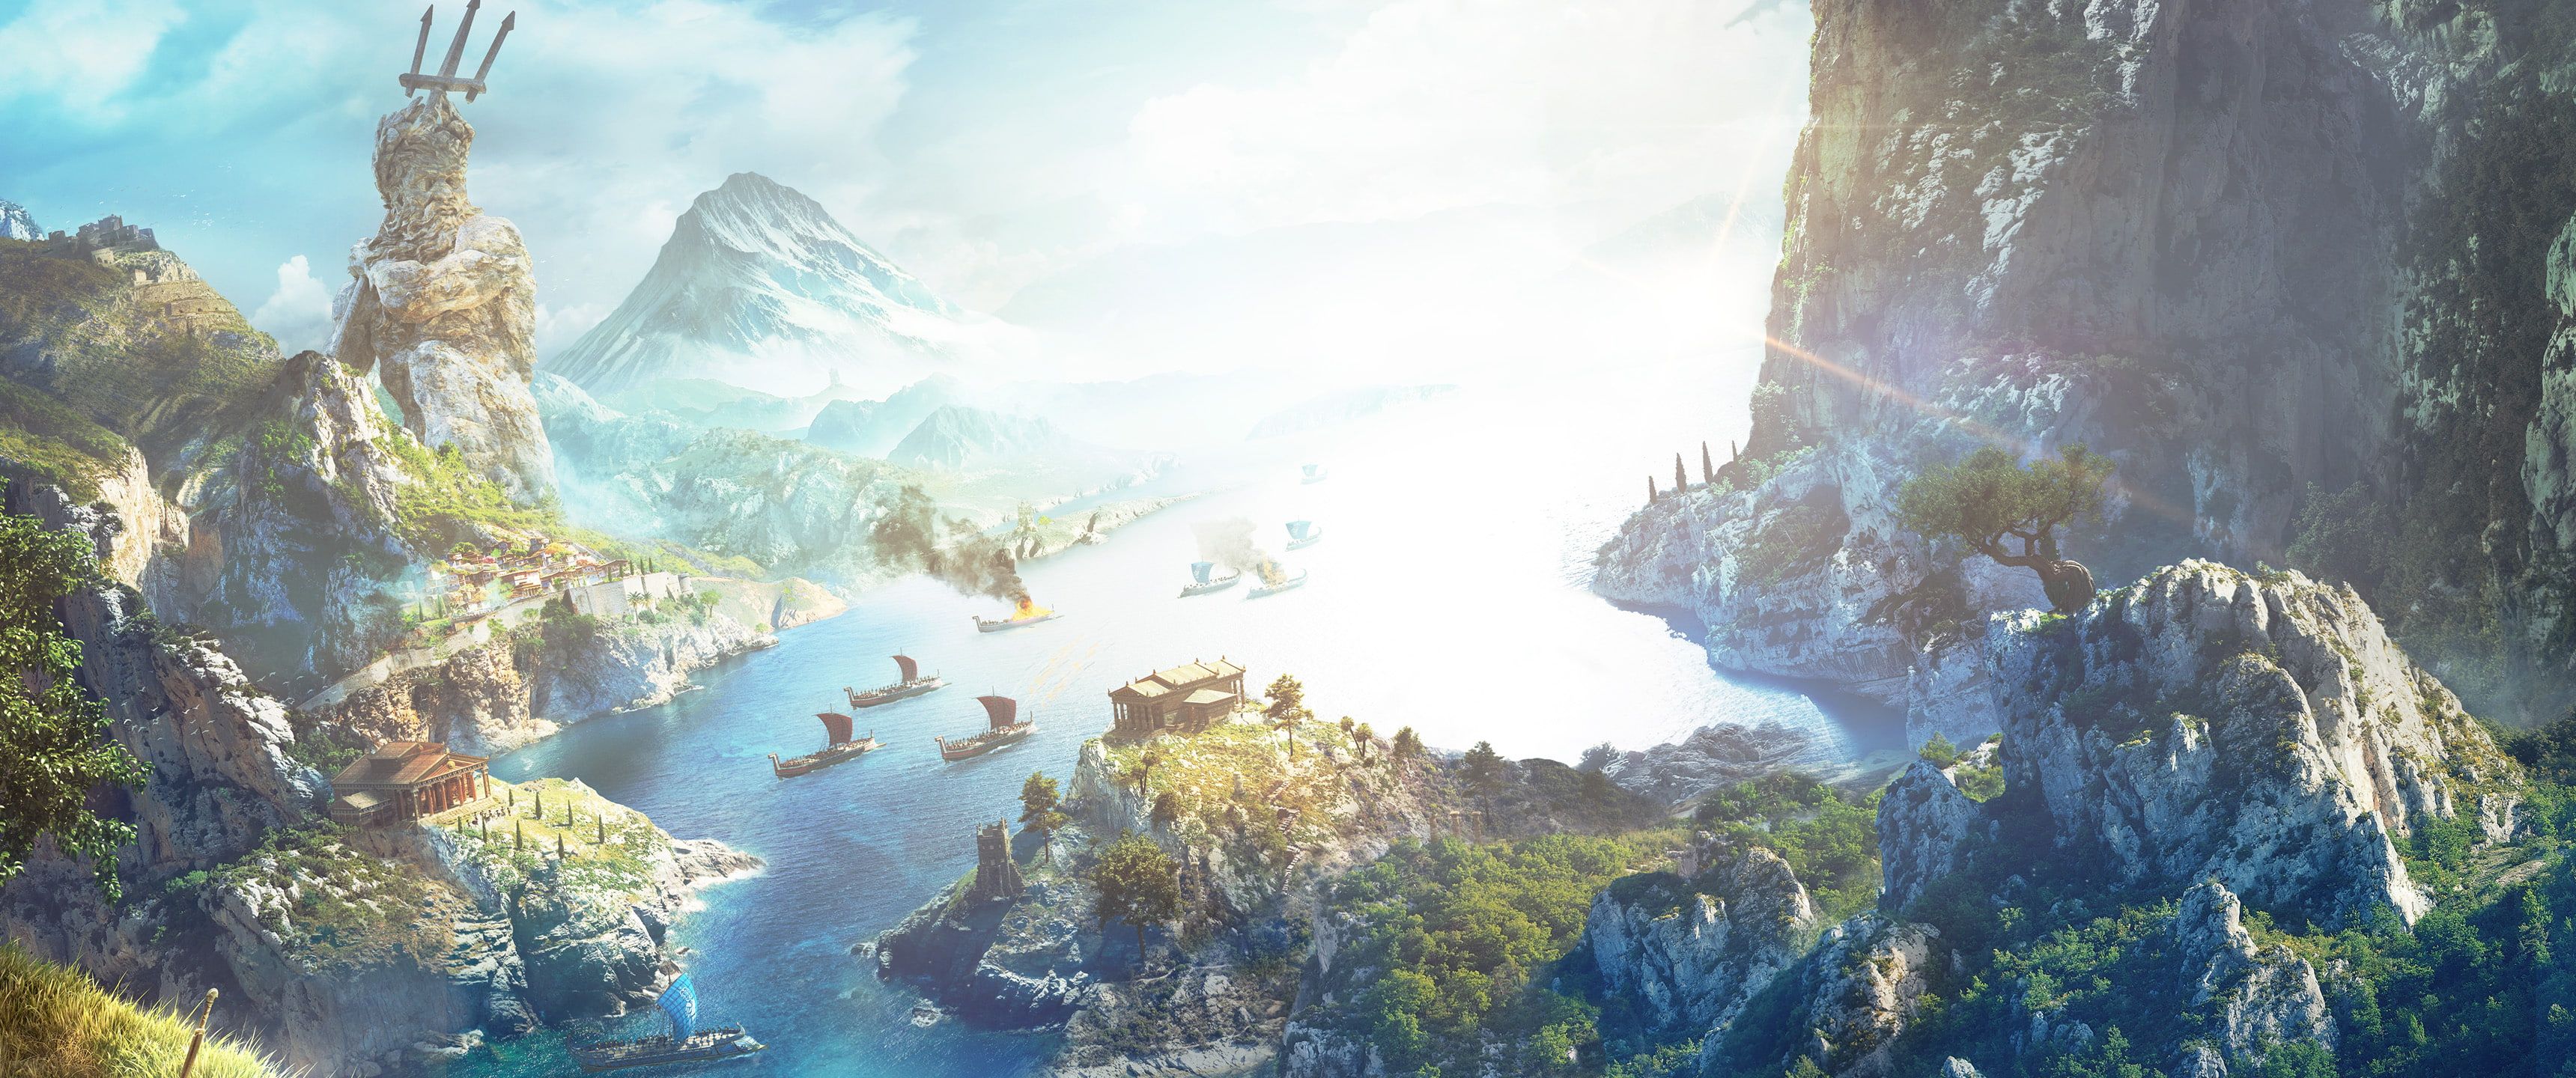 Ultrawide #ultra Wide Video Games Video Game Art Assassin's Creed Assassin's Creed Odyssey #Greece Ancient Greece #mythology. Game Art, Video Game Art, Wallpaper